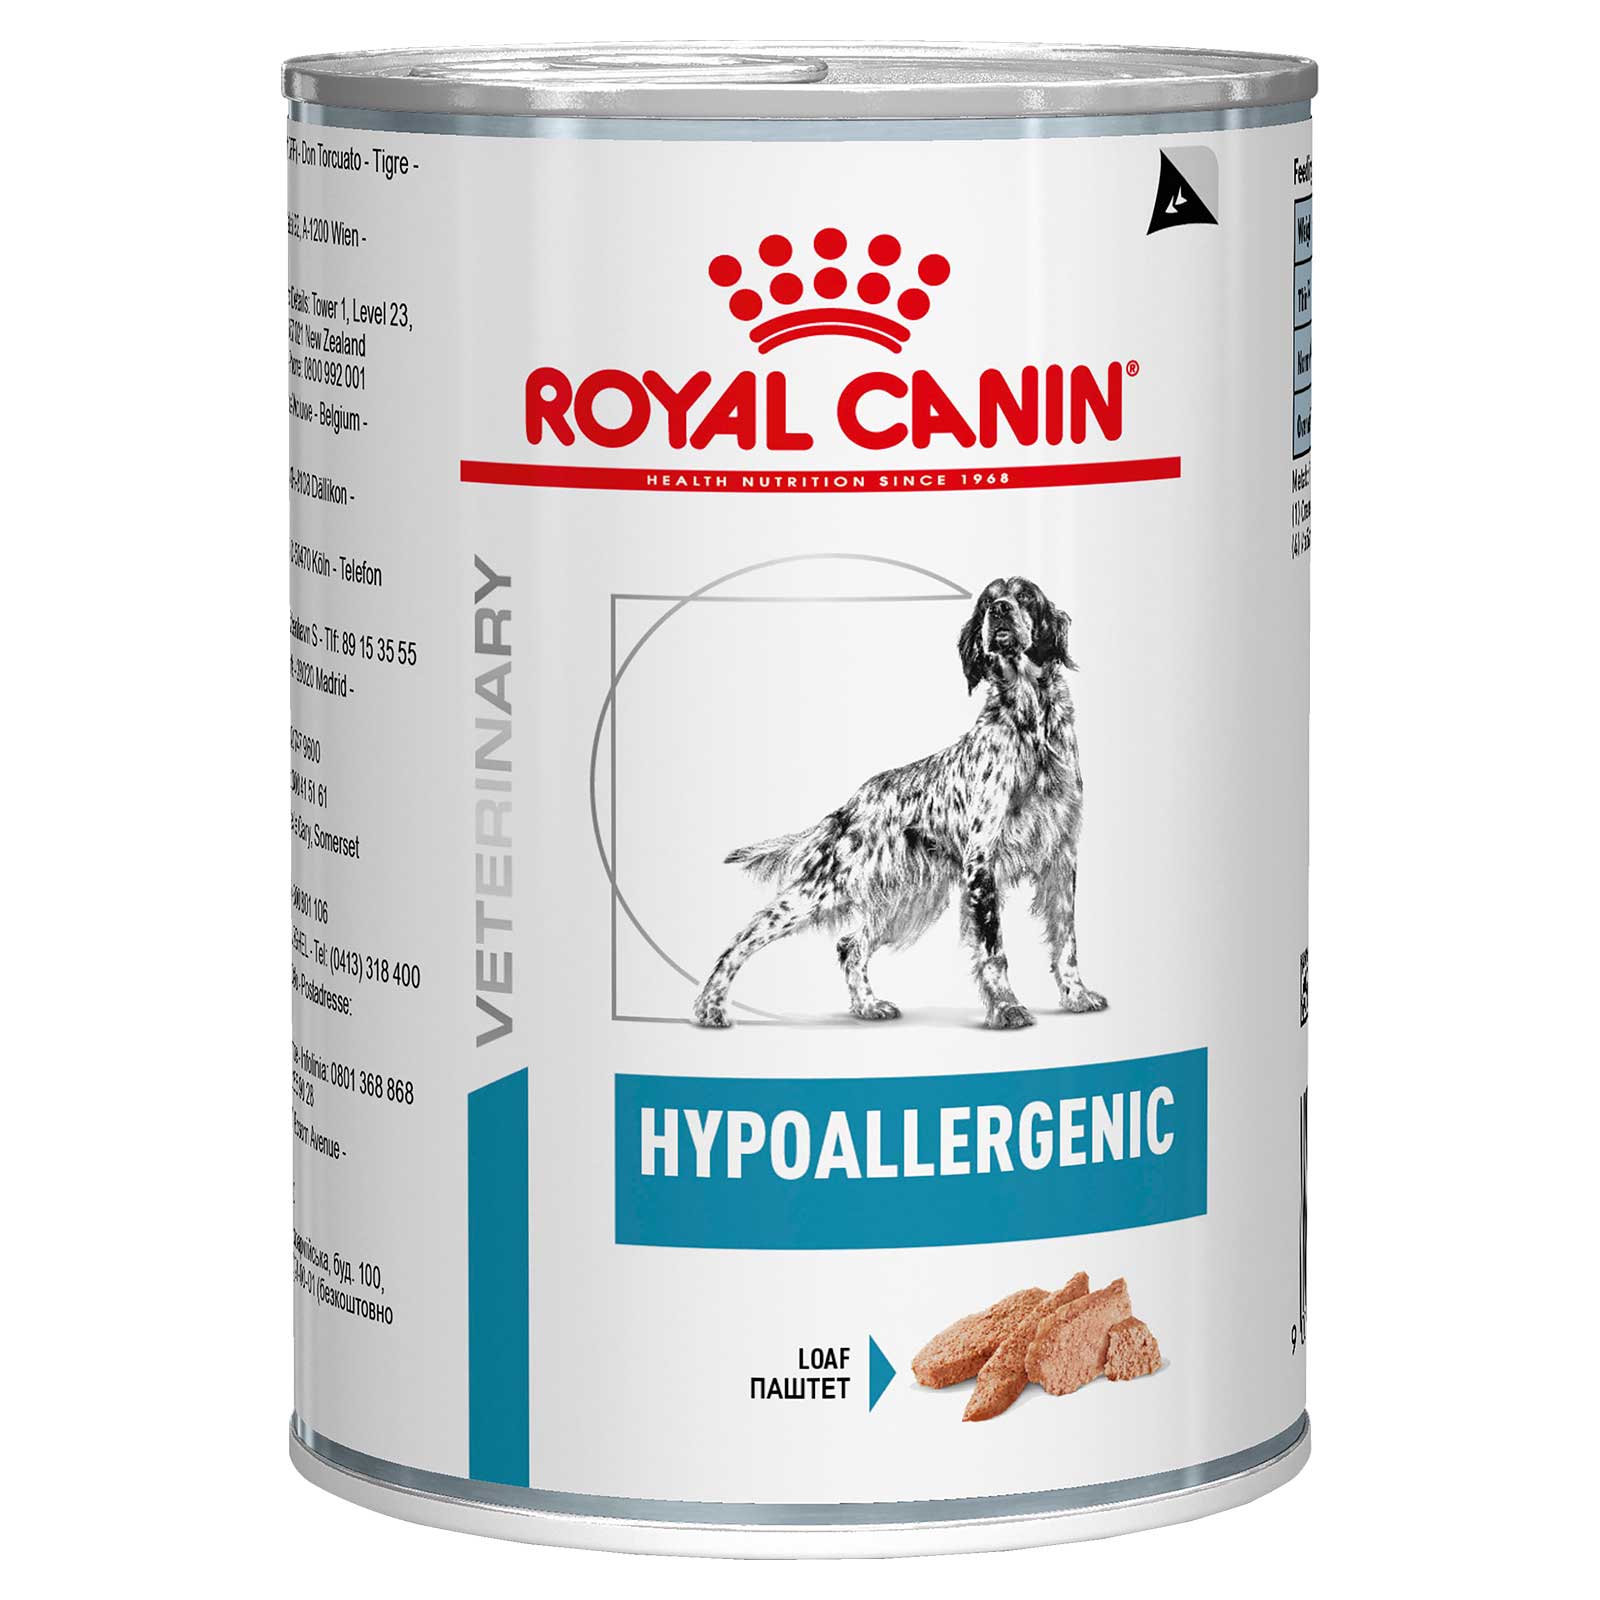 Royal Canin Veterinary Dog Food Can Hypoallergenic